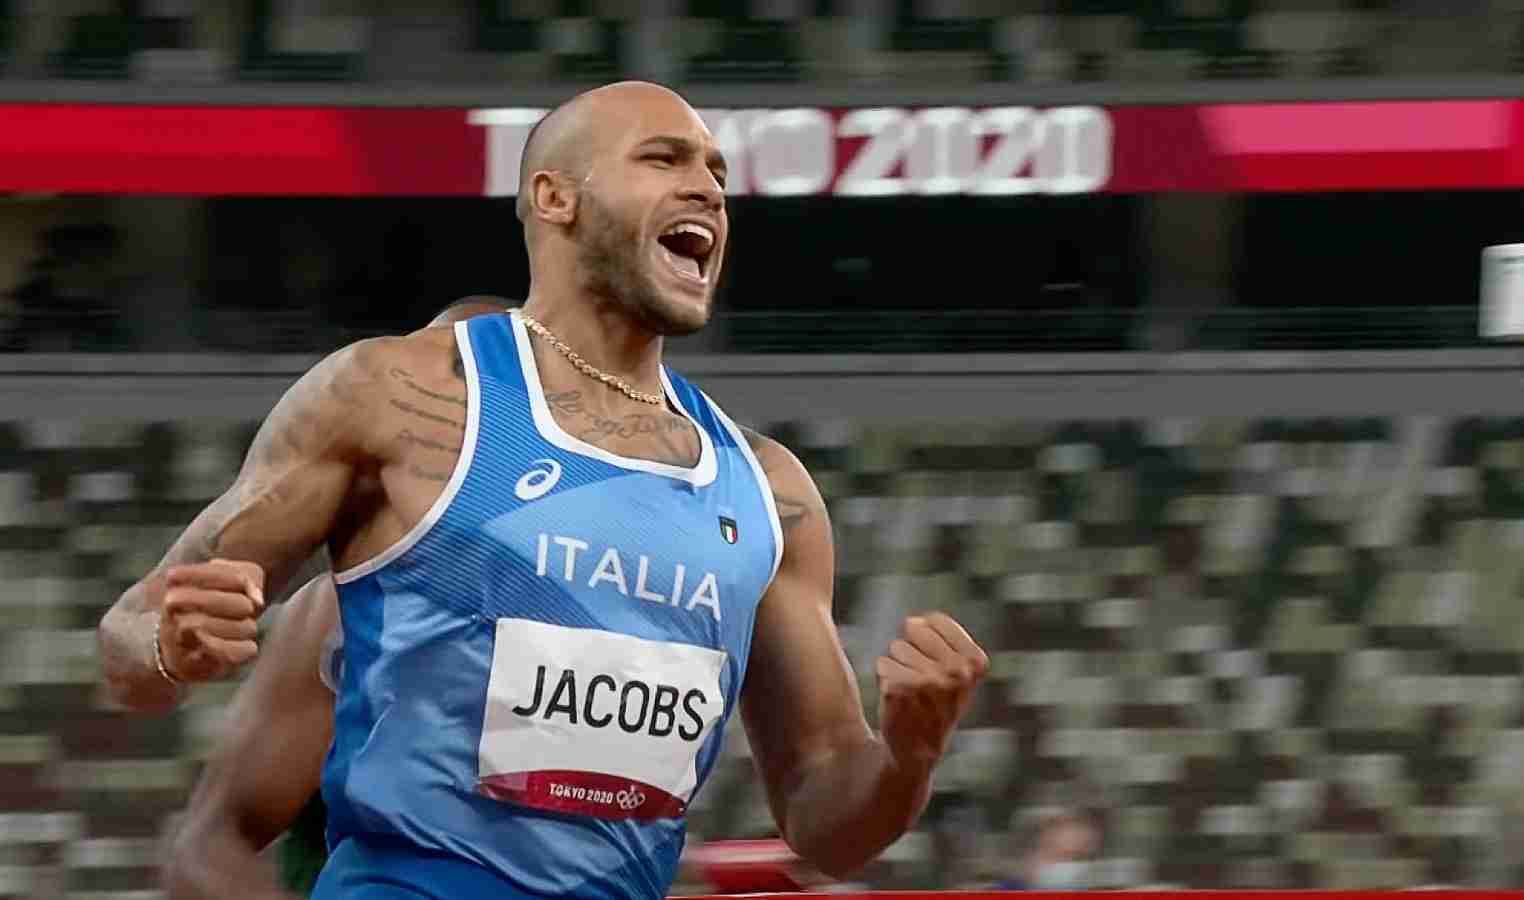 Olympic champion Jacobs not satisfied with performance at Italian Indoor Championships